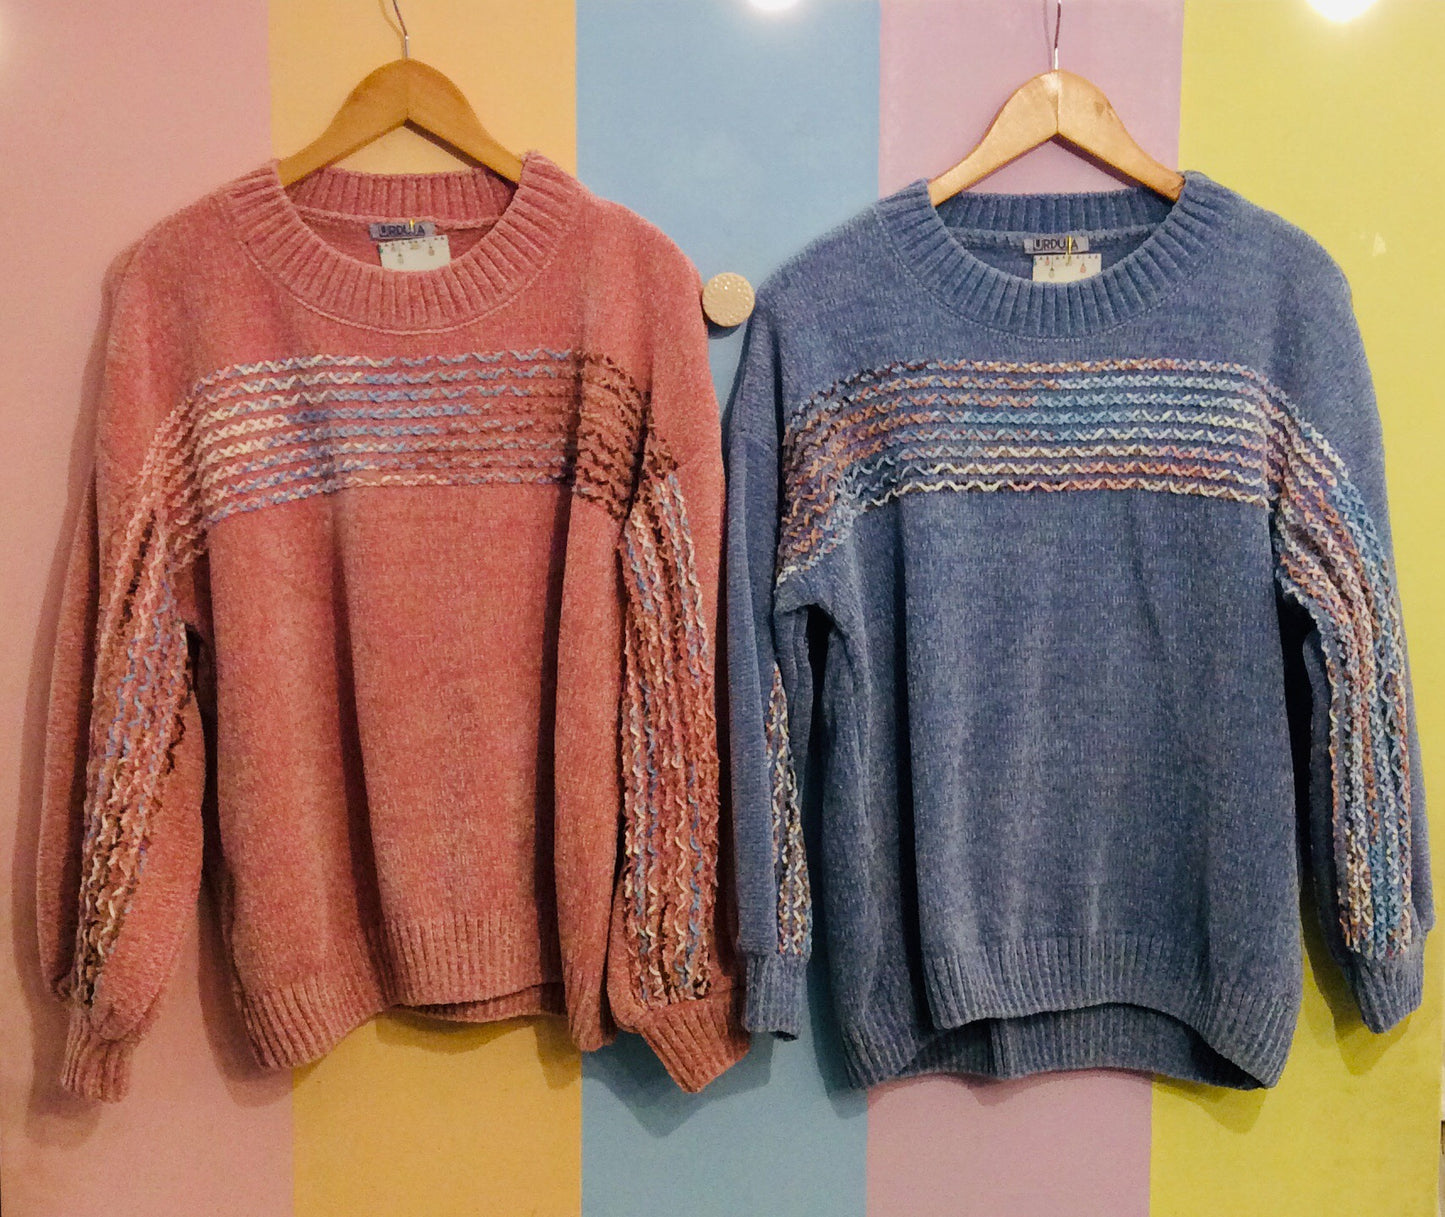 Plain & Colorful Stitches Sweater in Round Neck